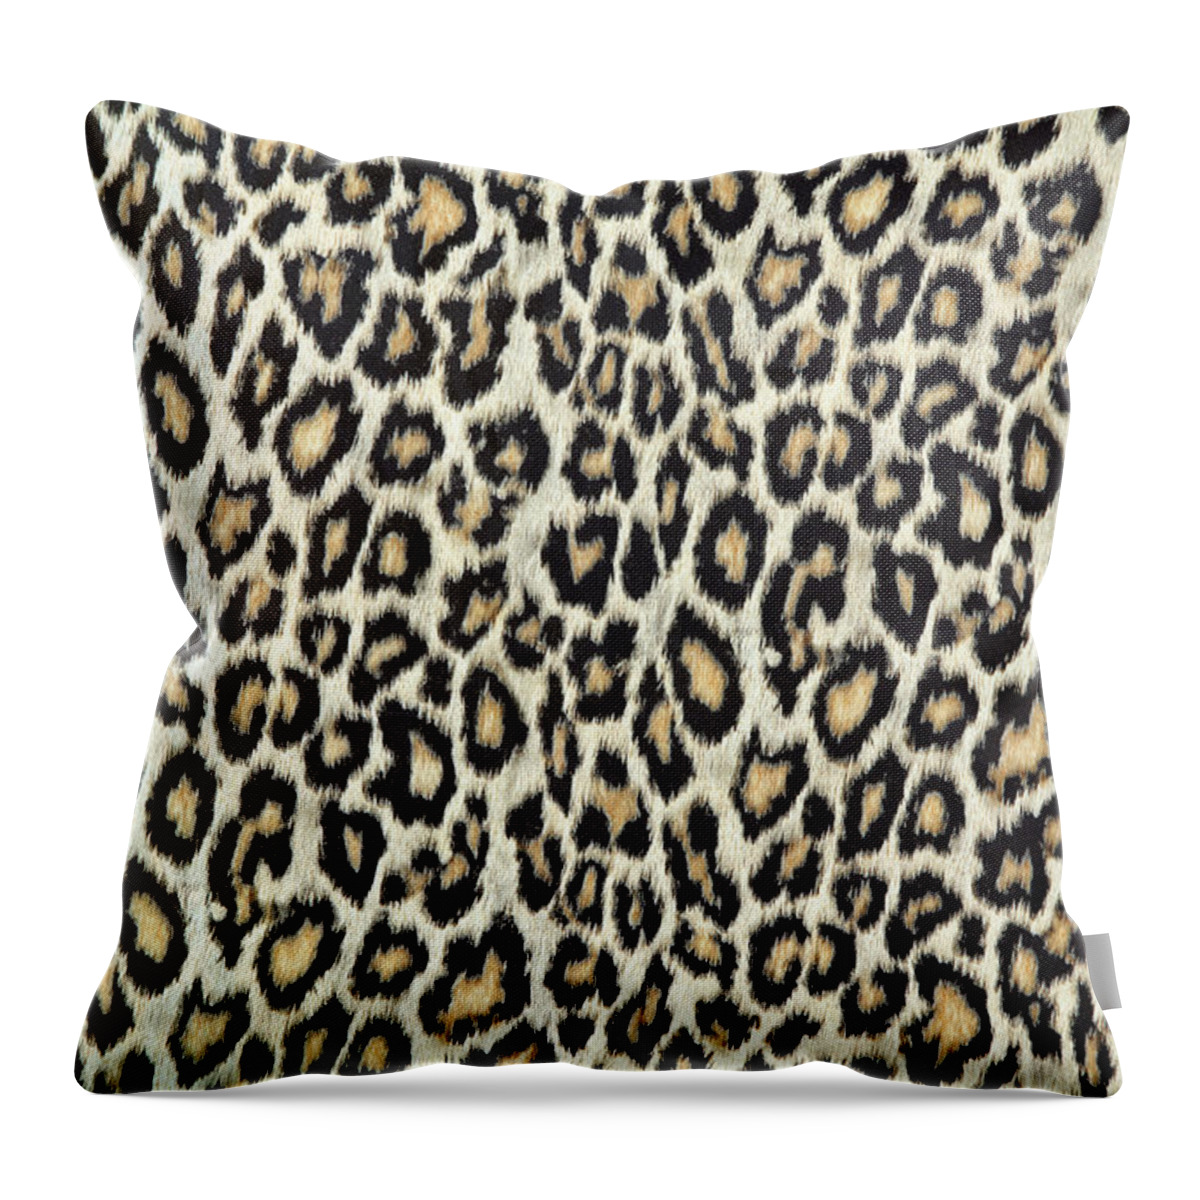 Tropical Rainforest Throw Pillow featuring the photograph Leopard Skin Texture Or Fabric by S-cphoto